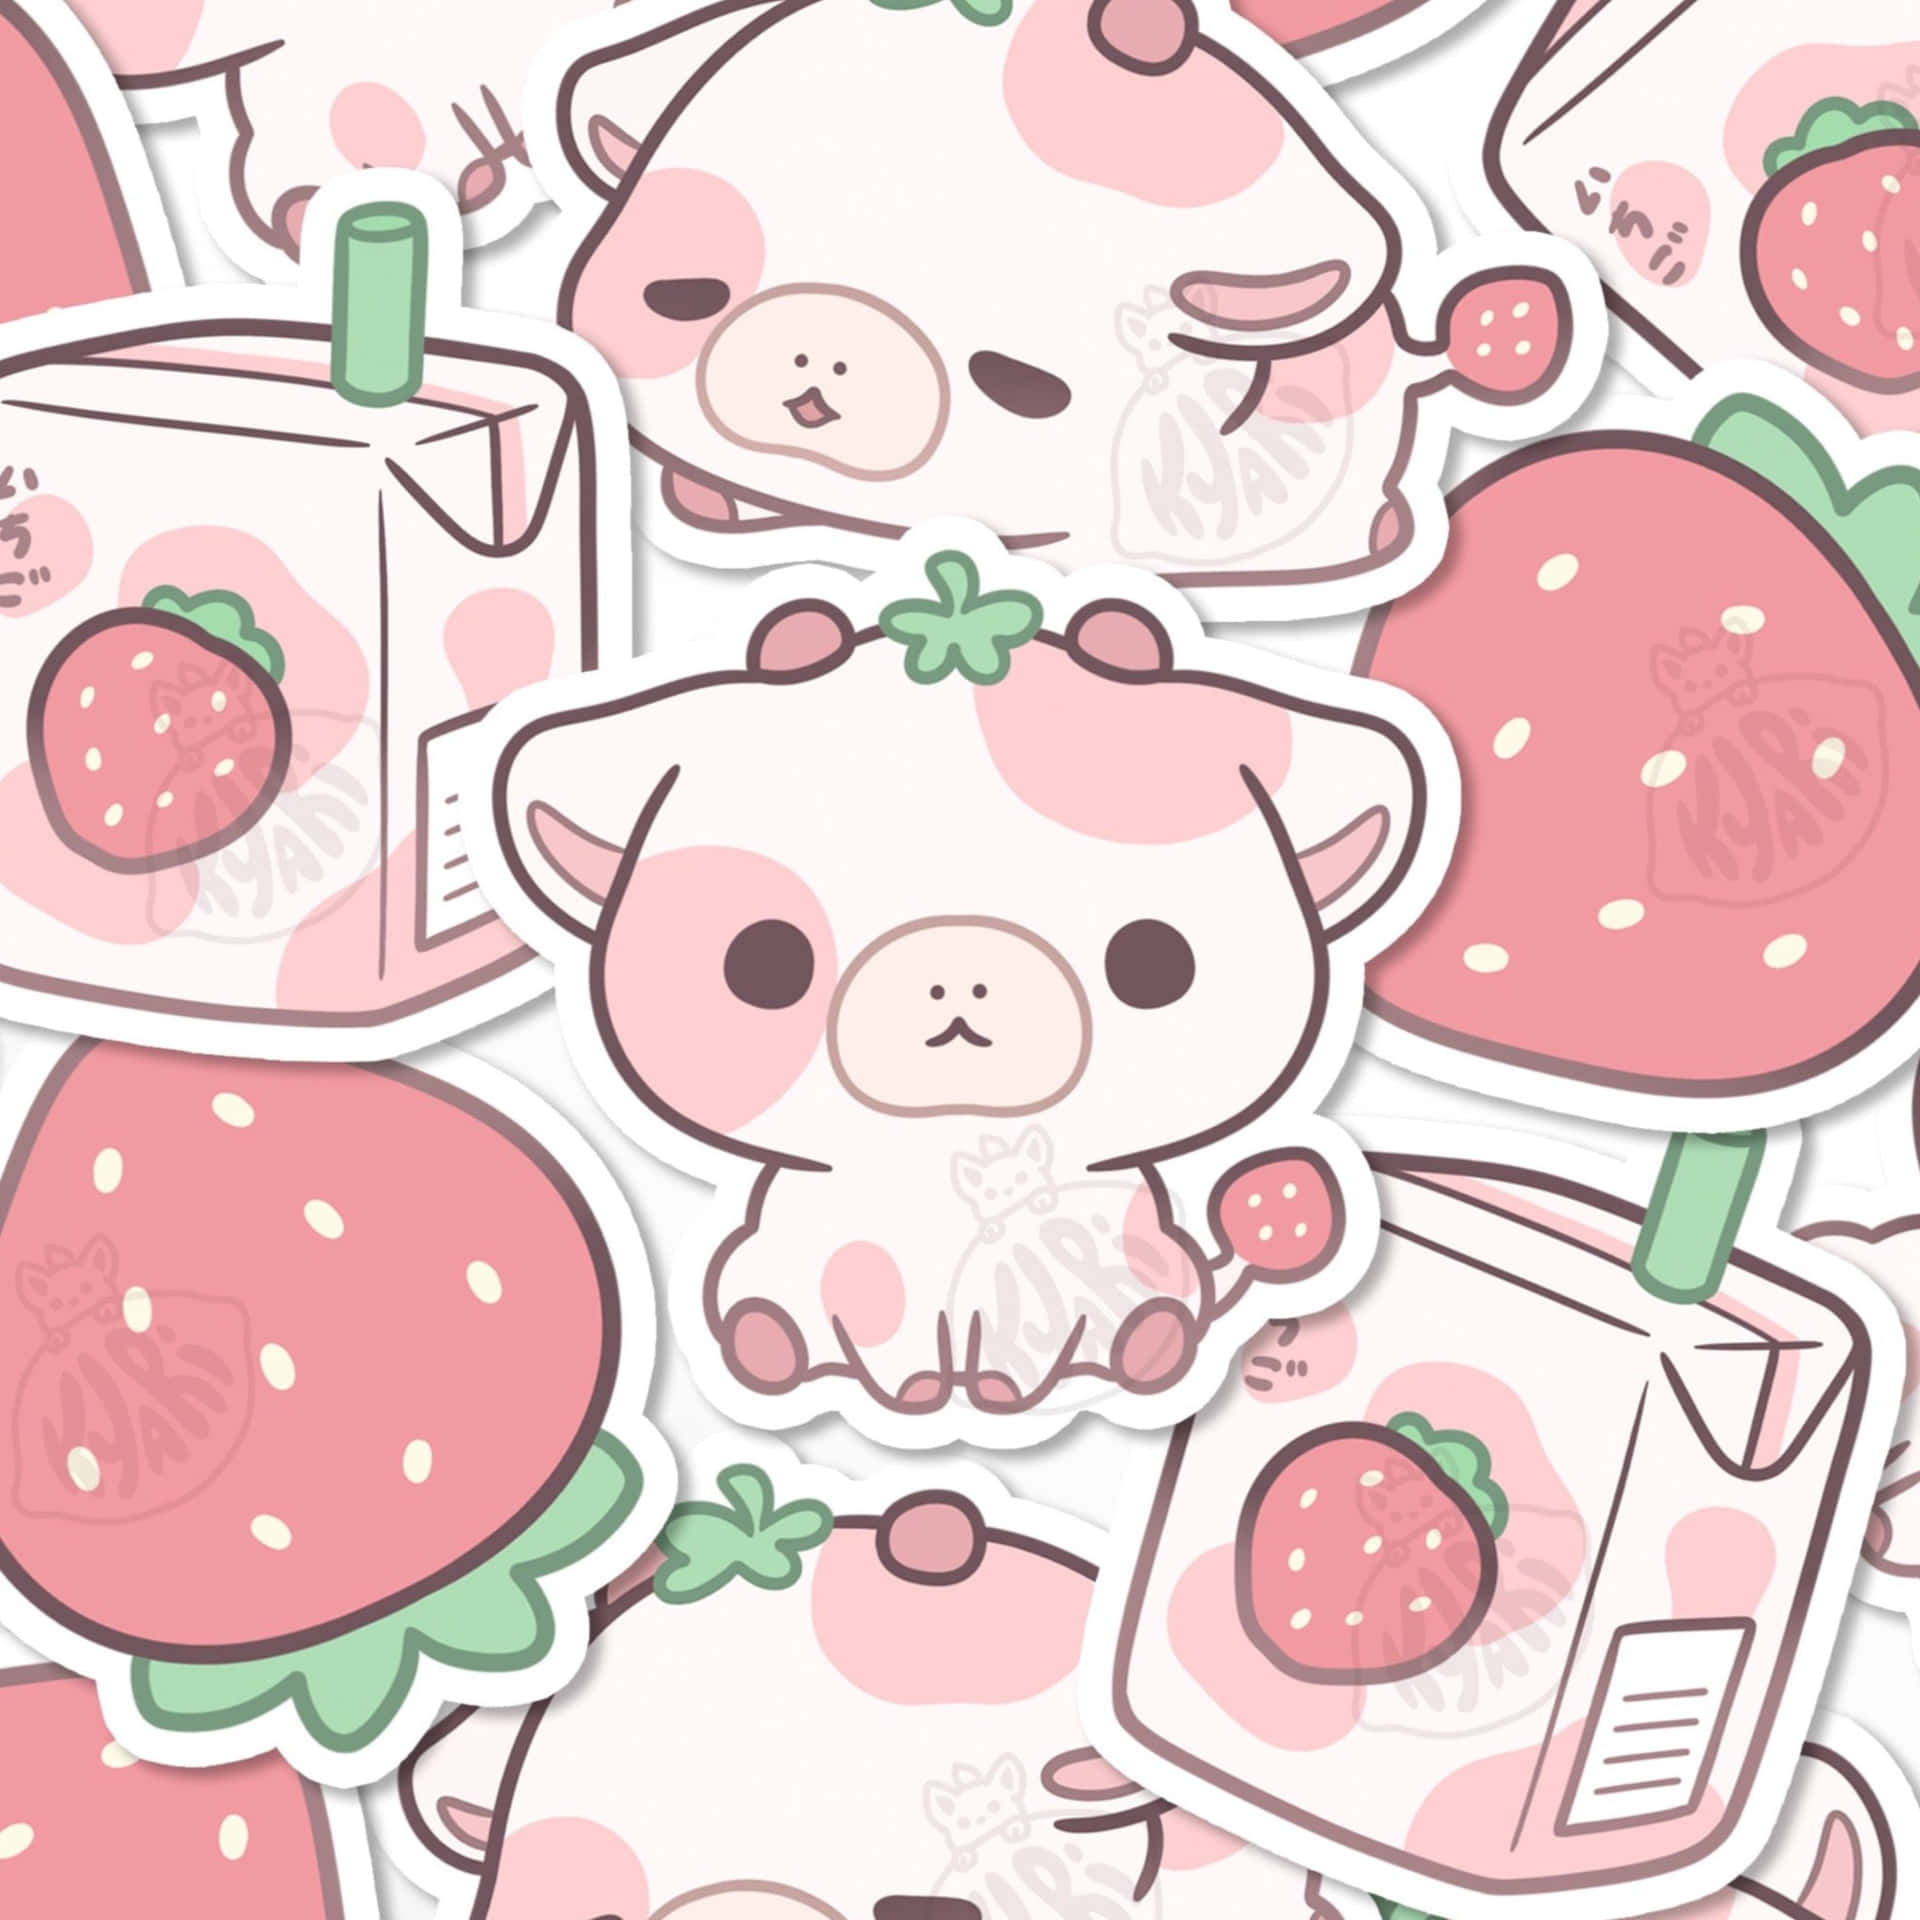 freetoeditstrawberrymilk cow strawberry cow pink aesthetic remixed  from lolahedits laz  Cow print wallpaper Pink wallpaper kawaii Wallpaper  pink cute